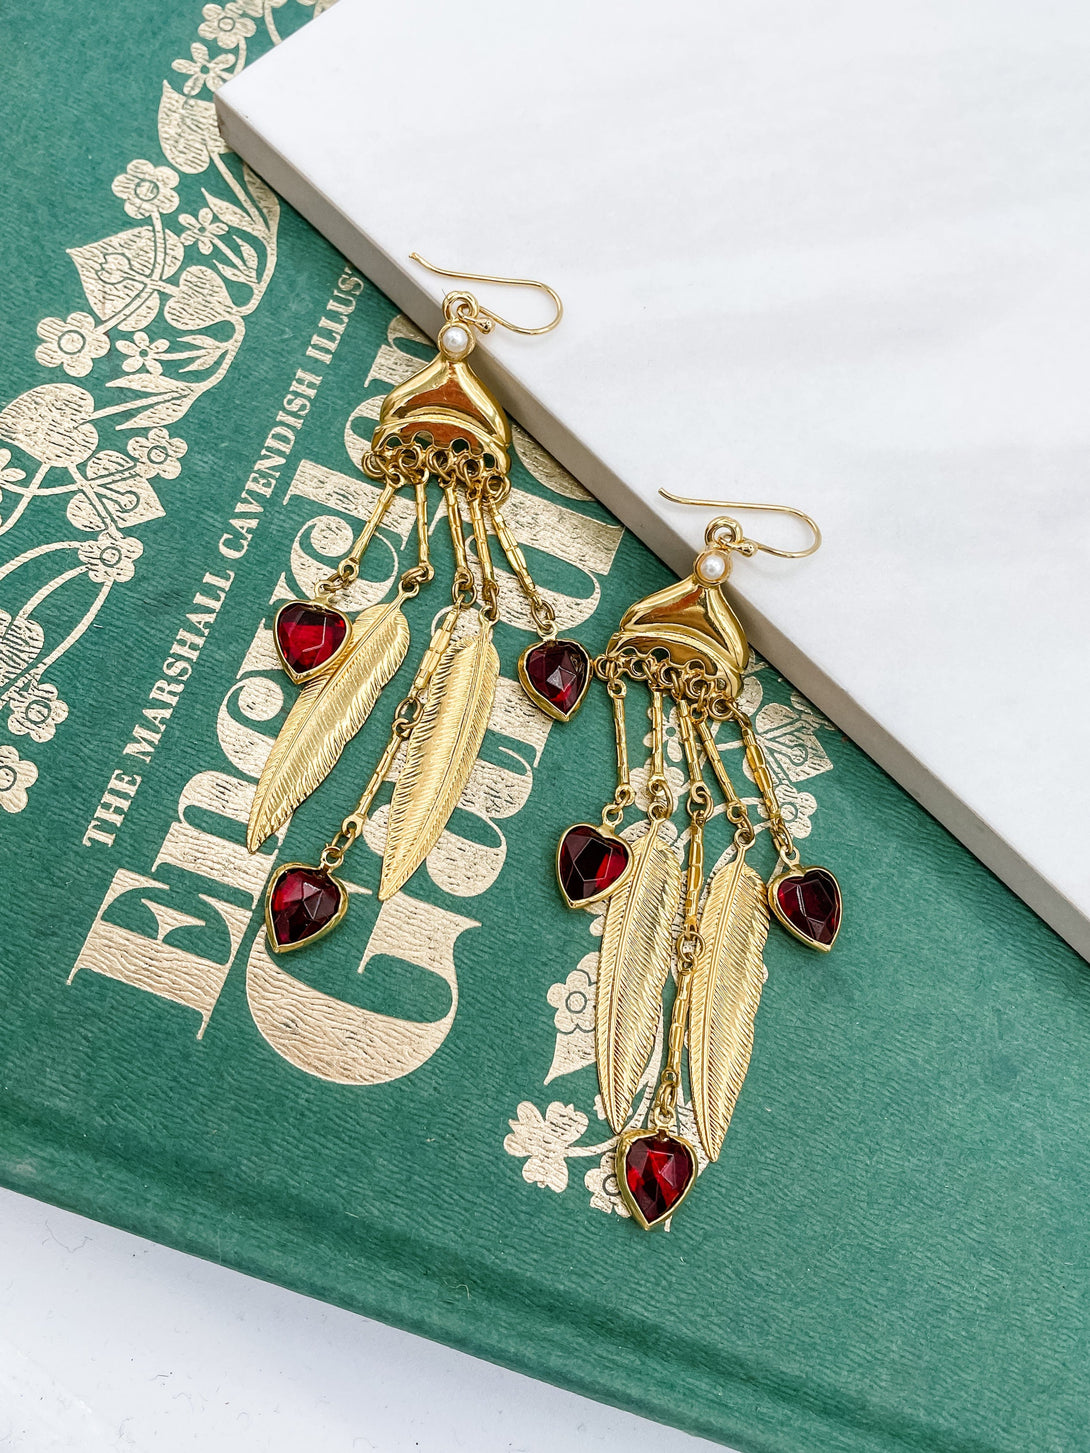 Raphael Vintage Earrings with Gold Feathers and Crystal Hearts